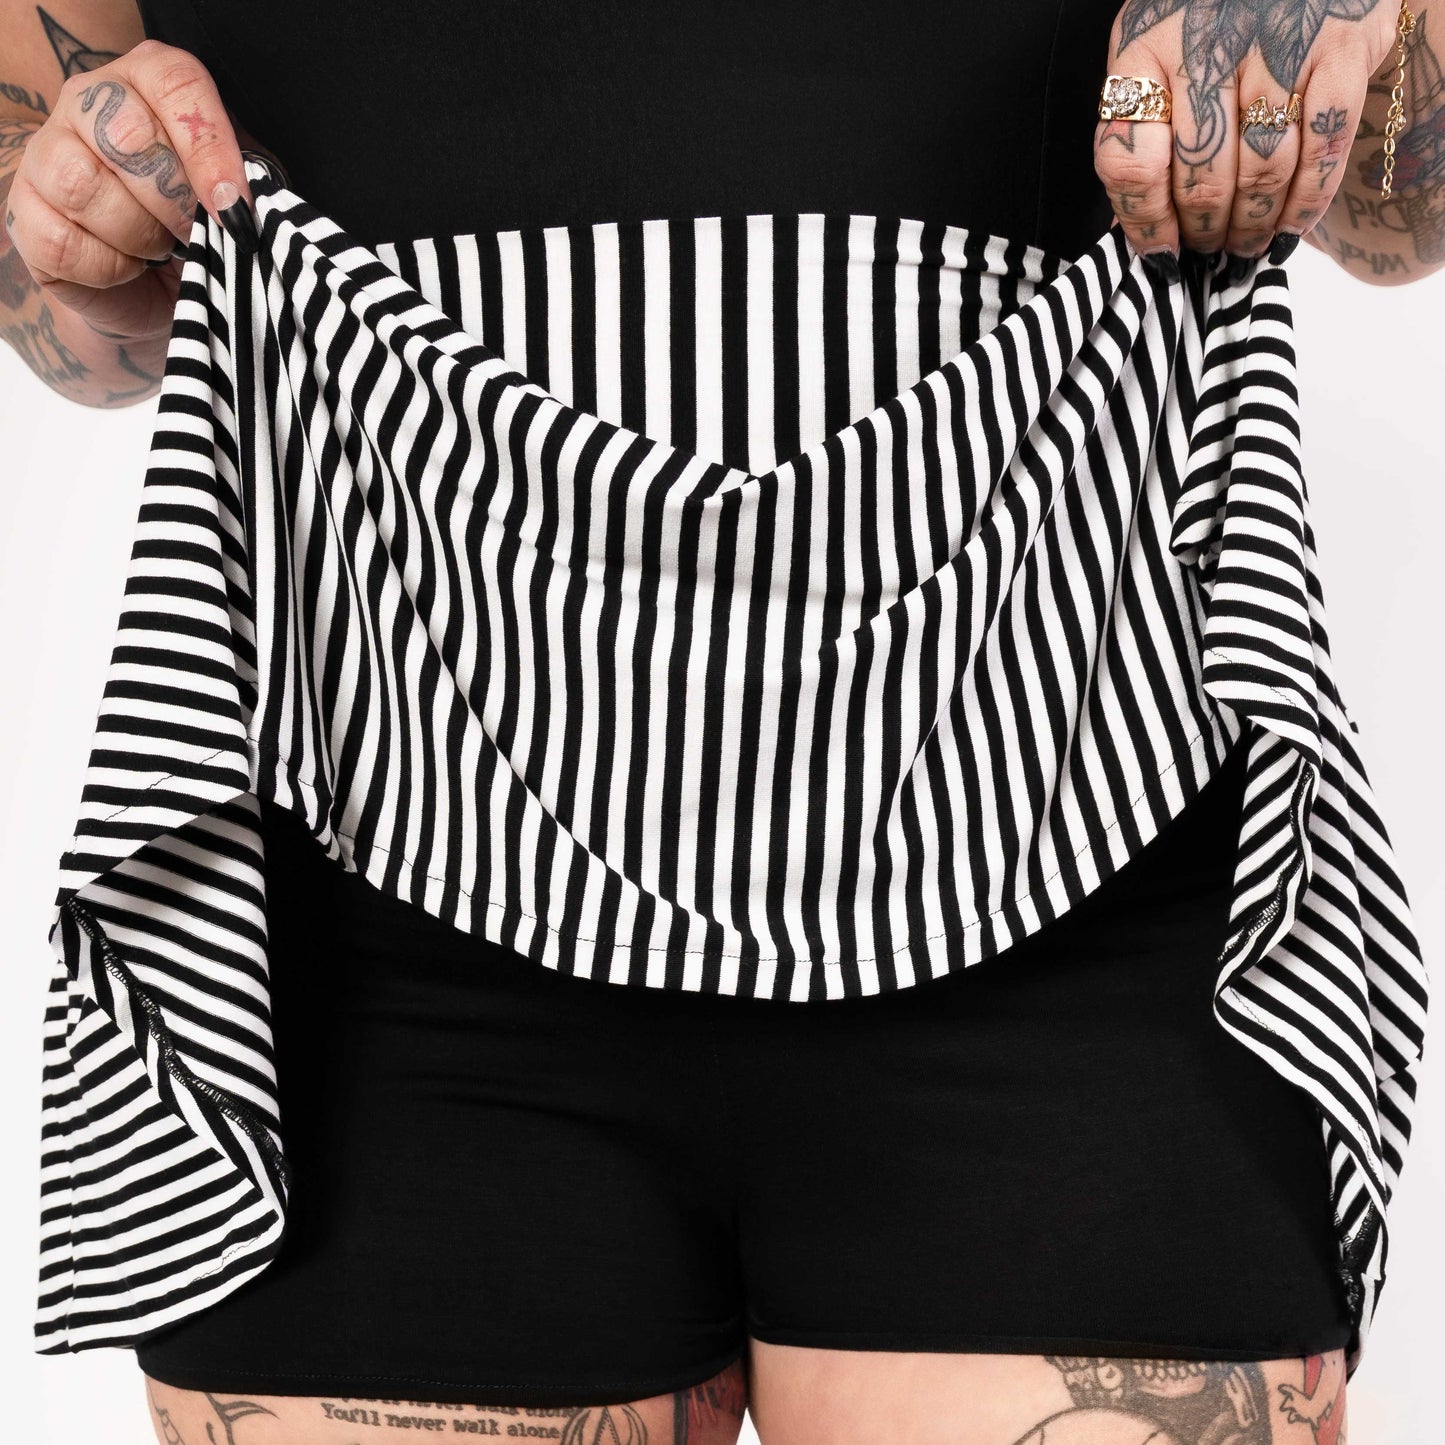 Jupe-shorts Why bother - Noir/blanc rayé